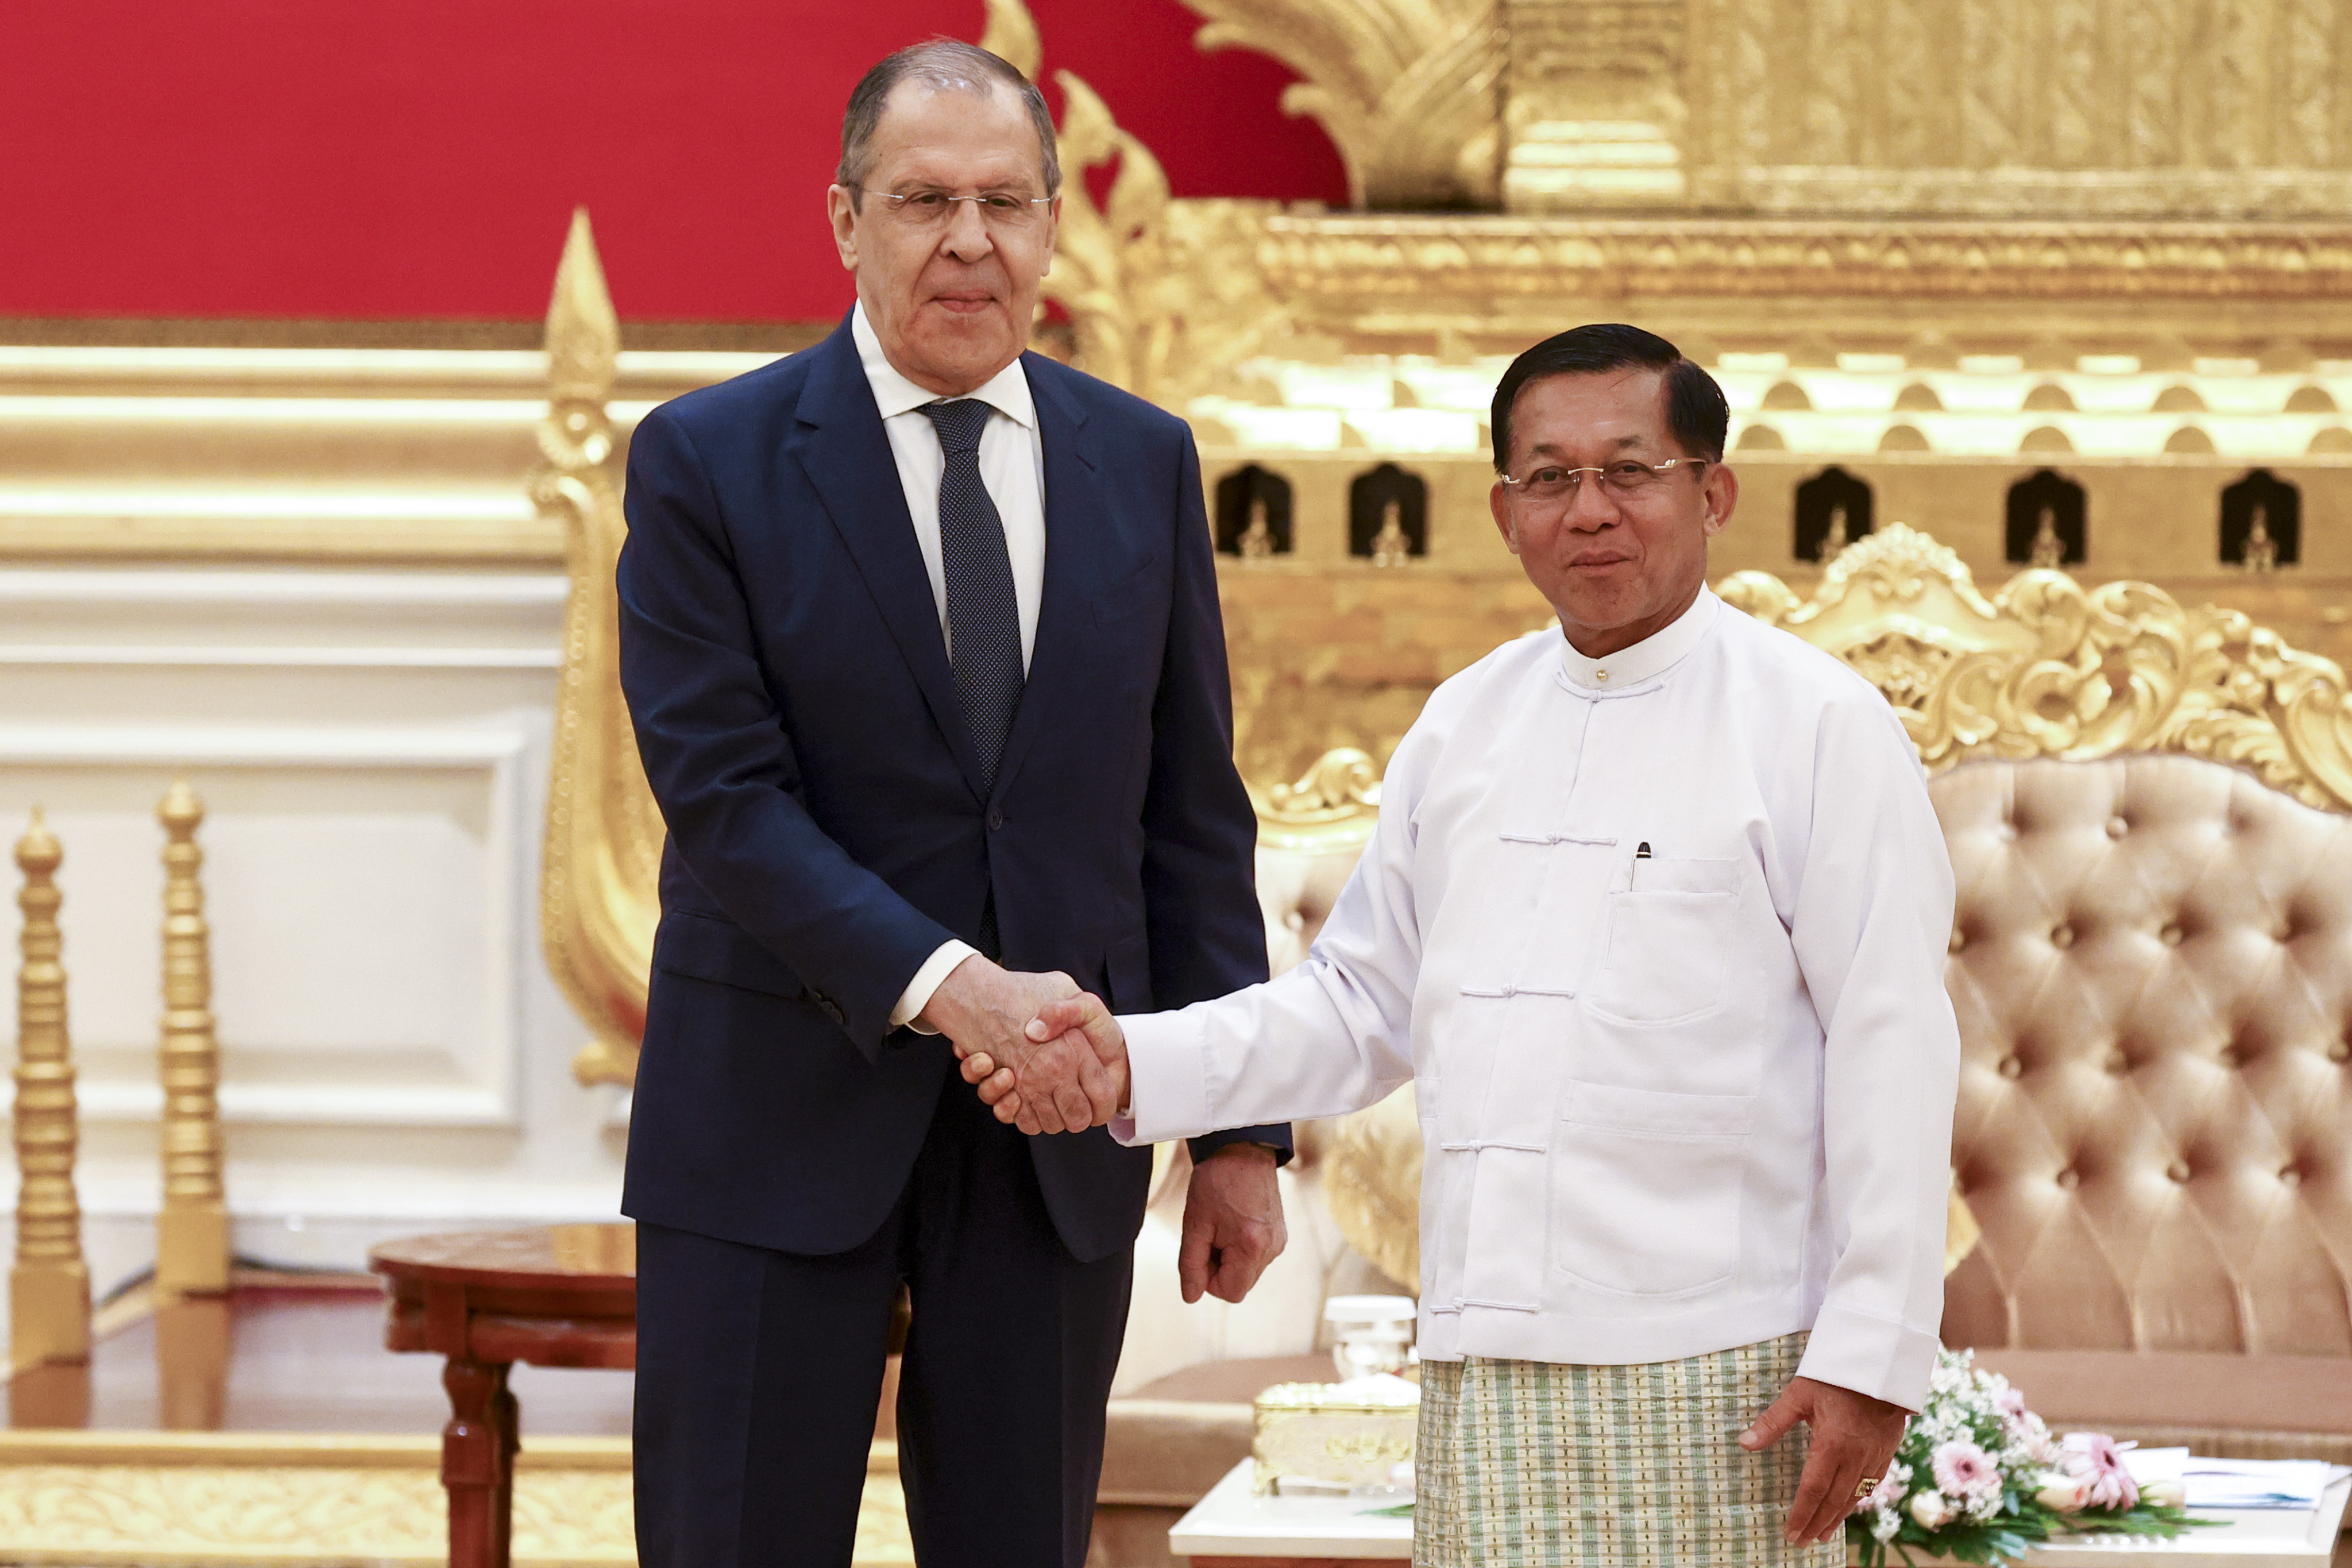 Russian Foreign Minister Sergey Lavrov (left) and  Myanmar junta chief Min Aung Hlaing during their meeting in Naypyidaw earlier this month. Photo: Russian Foreign Ministry Press Service via AP